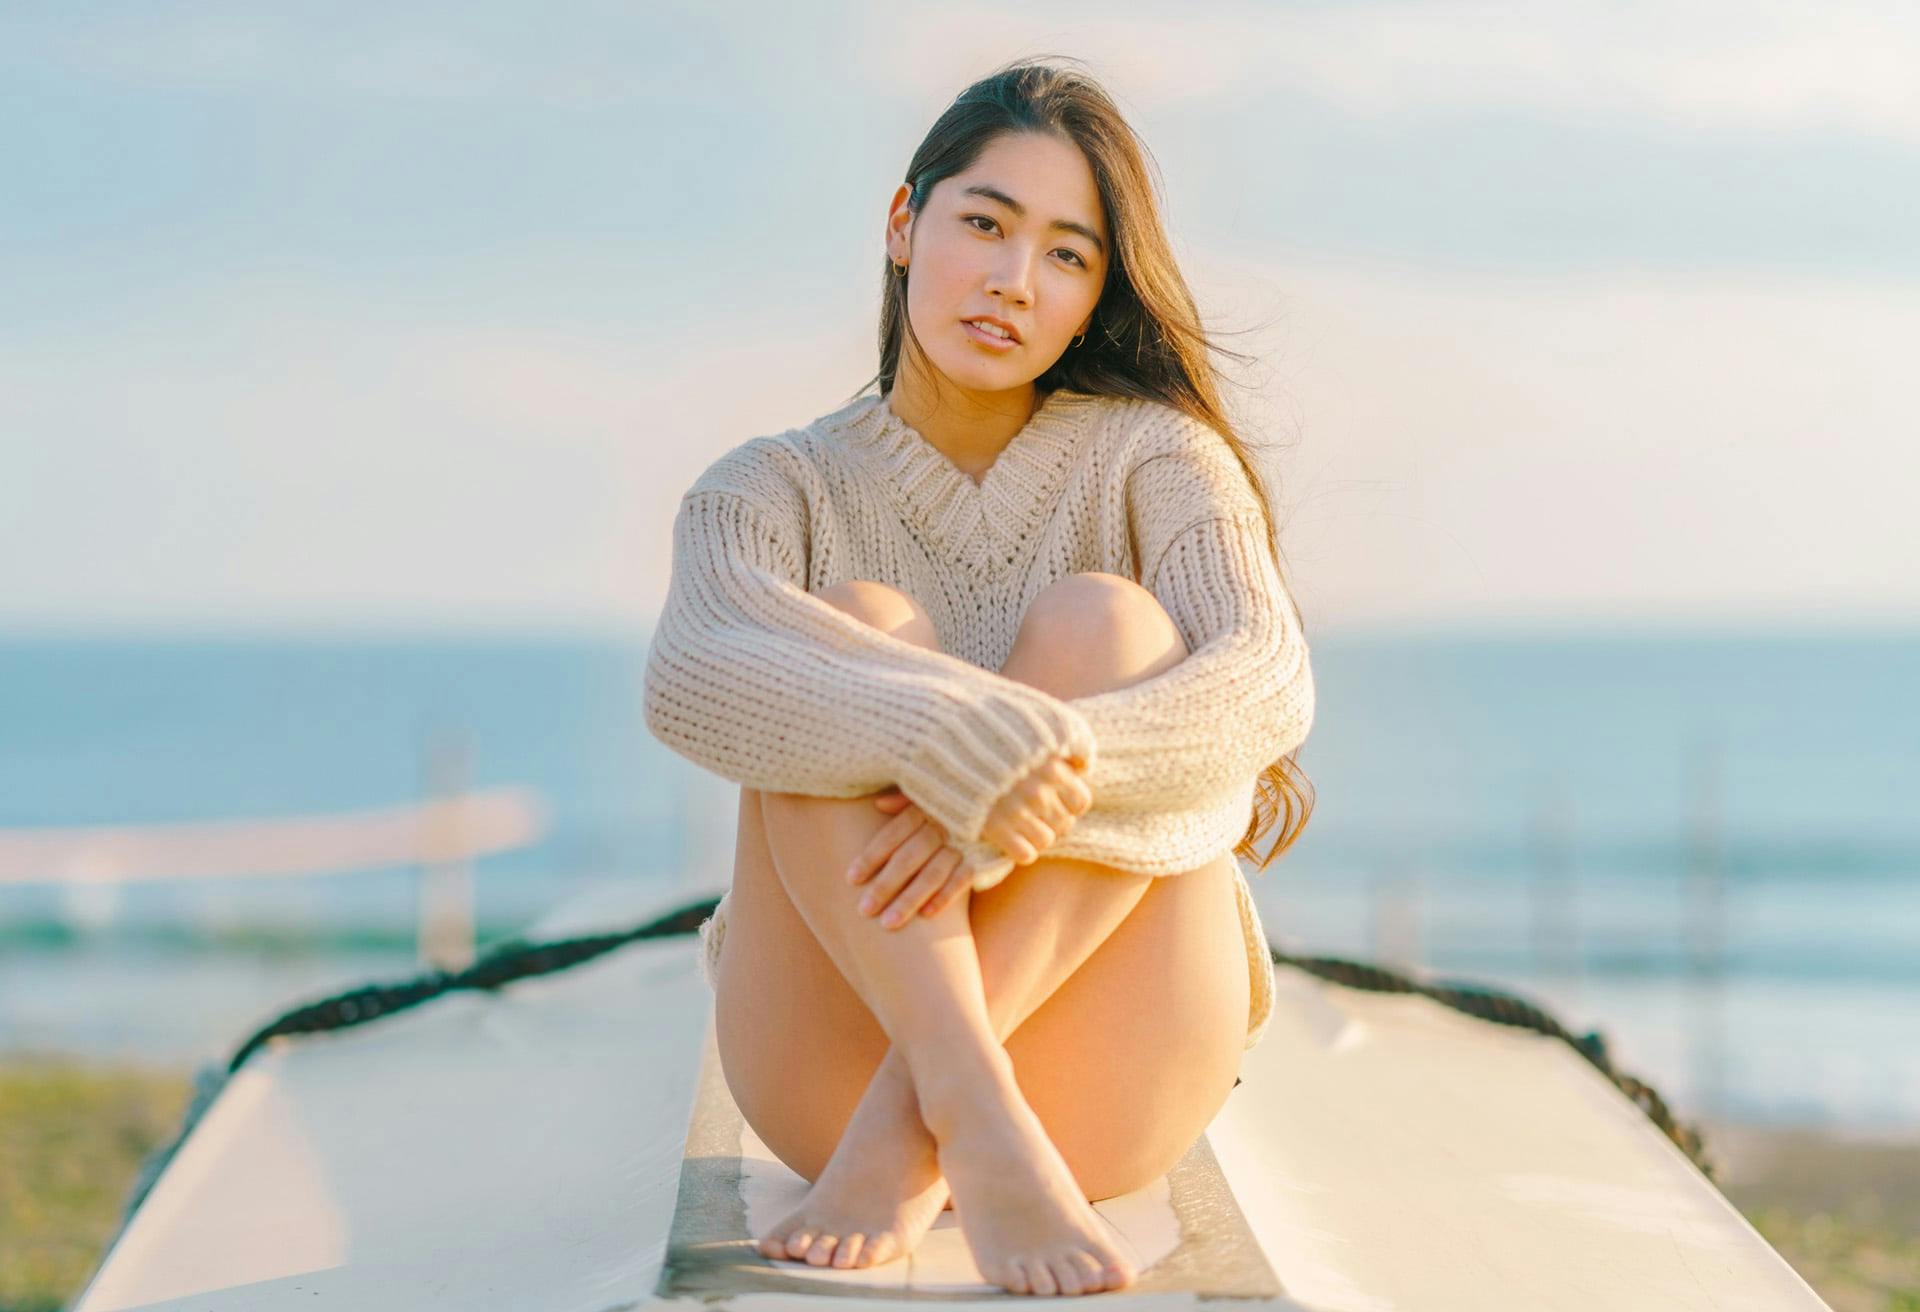 Woman sitting down wearing a knitted sweater